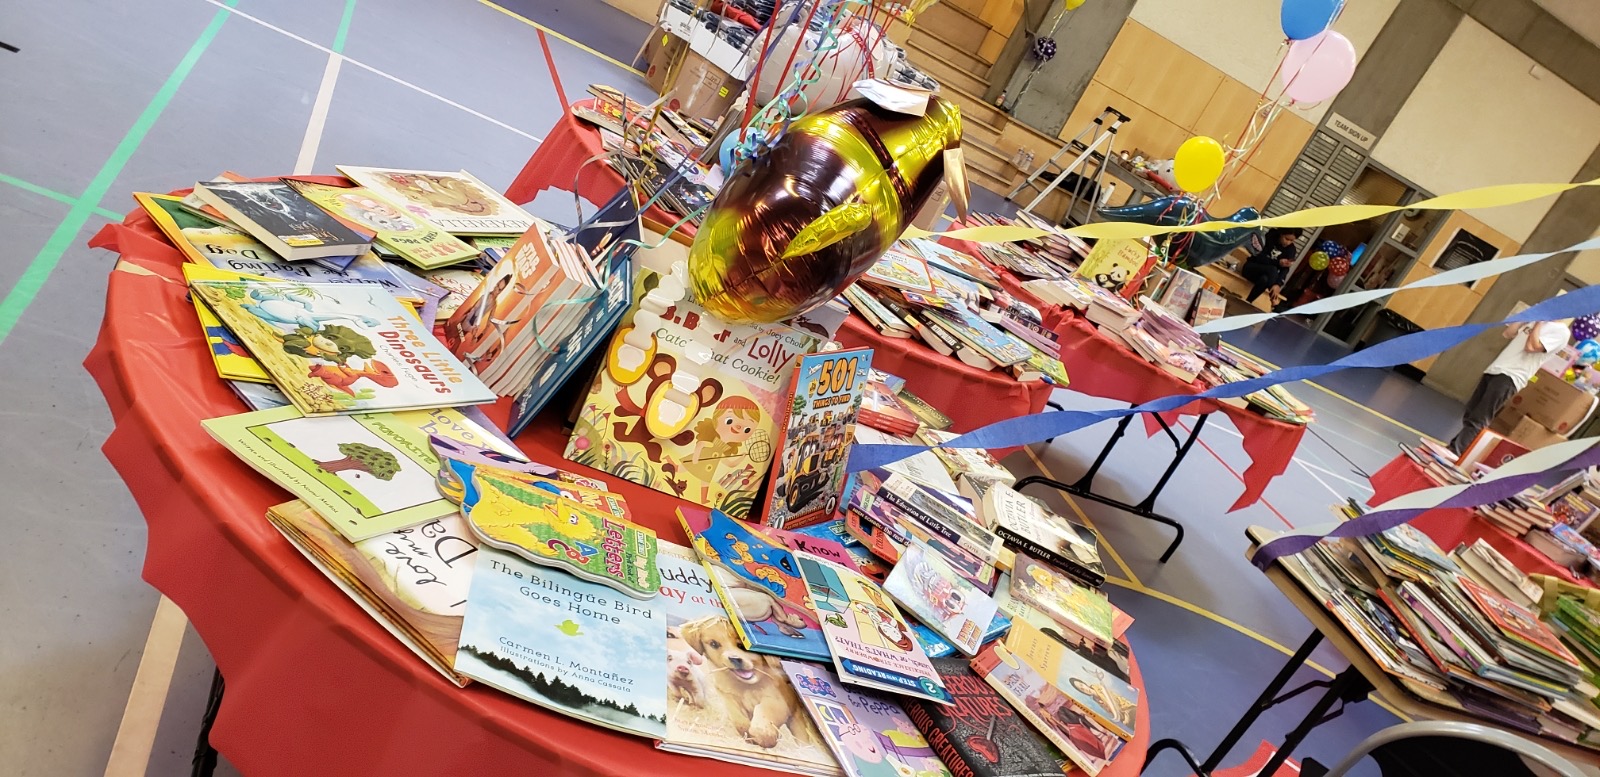 A table covered with books and magazines on top of it.